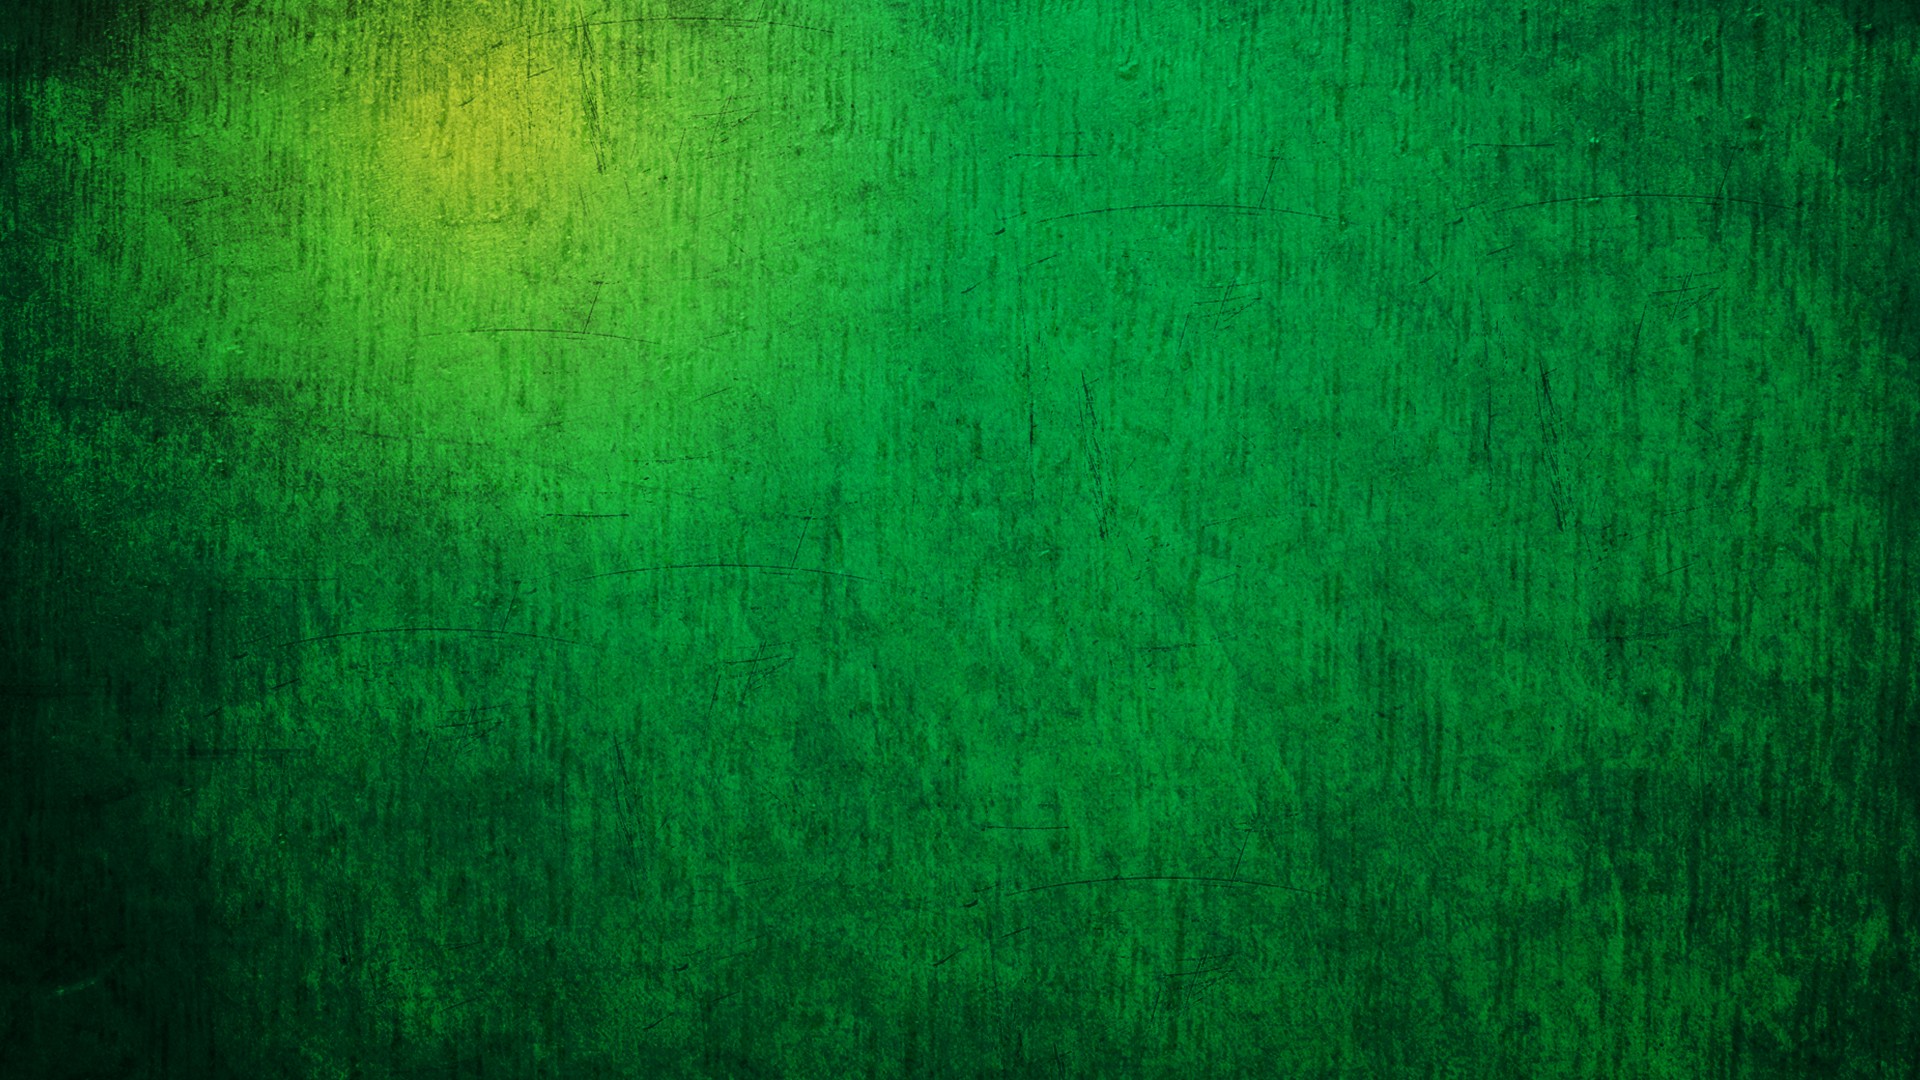 Green Wallpaper For Desktop with resolution 1920X1080 pixel. You can use this wallpaper as background for your desktop Computer Screensavers, Android or iPhone smartphones